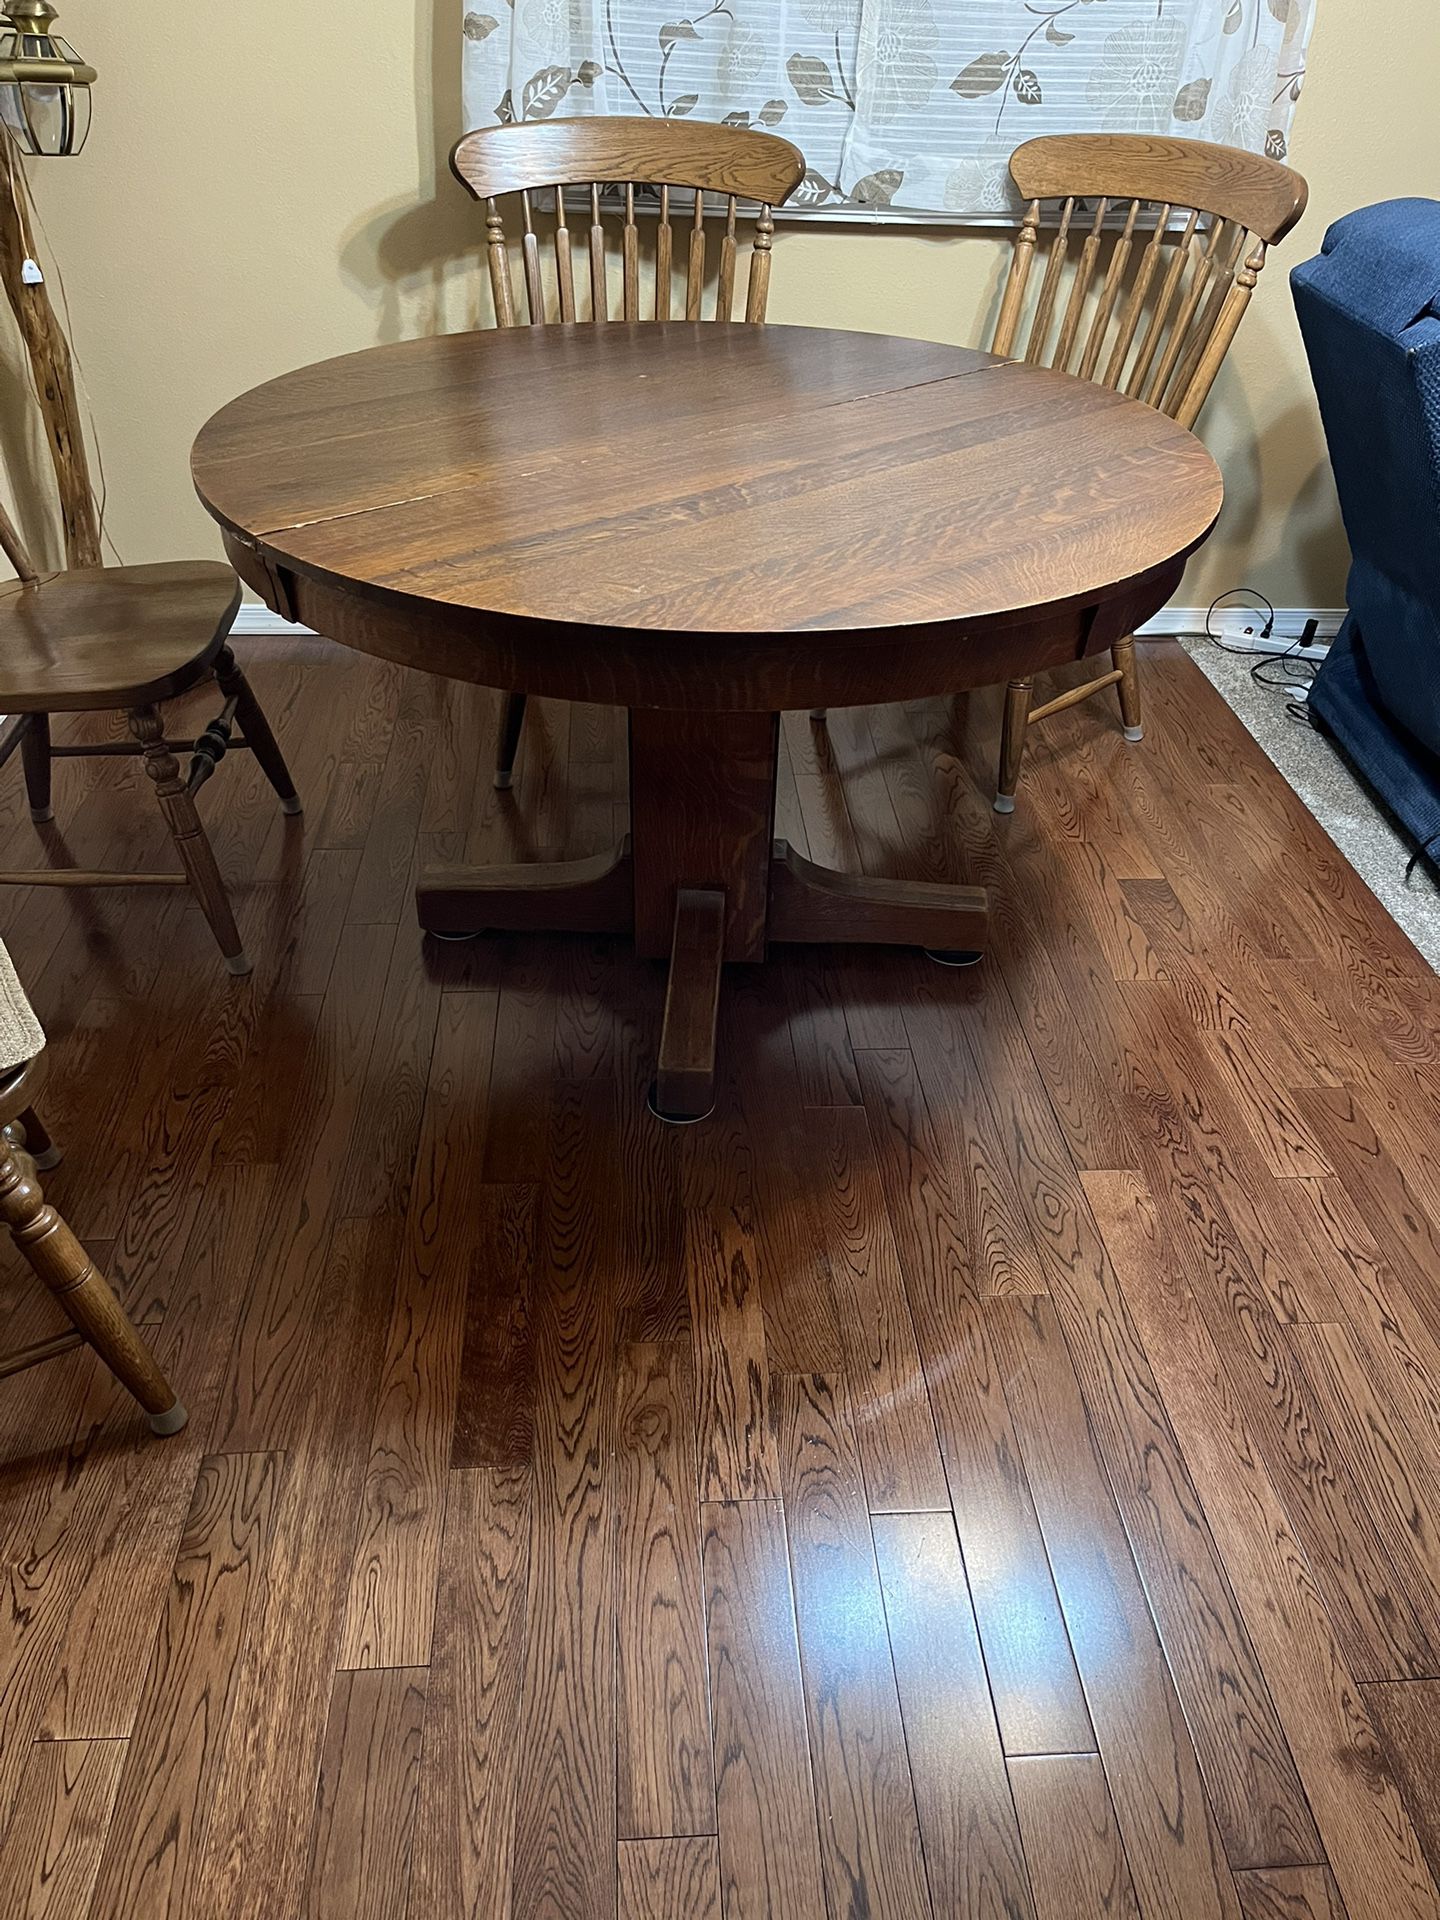 Antique Round Wooden table